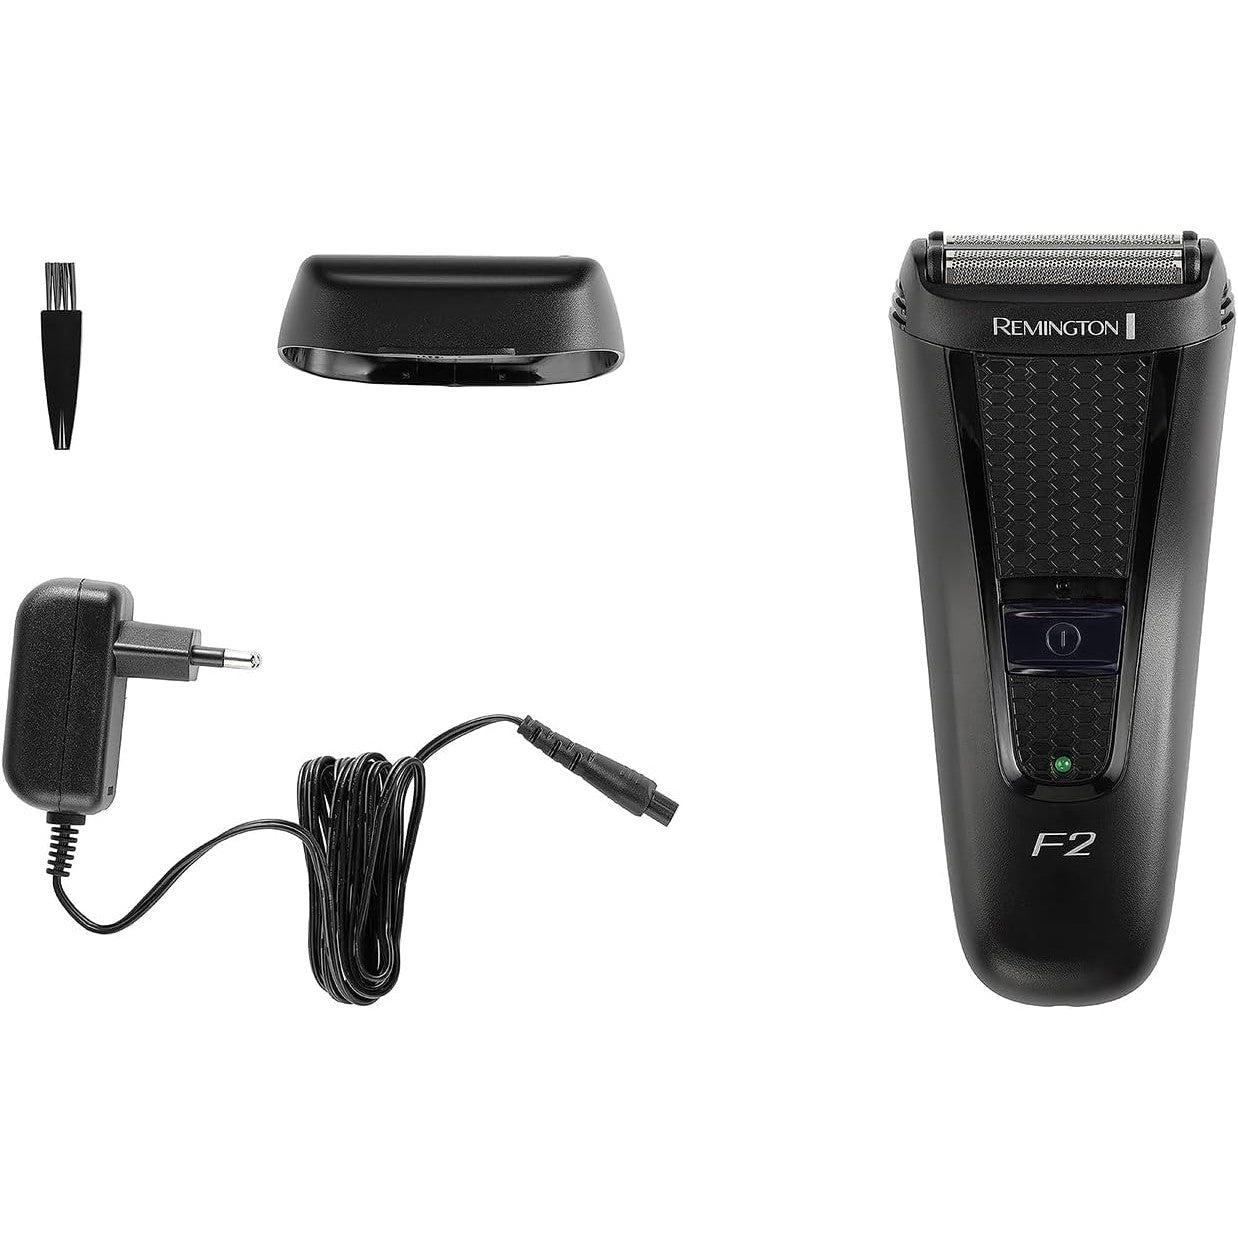 Remington Style Series F2 Foil Shaver - Cordless Electric Razor for Men with Pop Up Trimmer, Rechargable, F2002